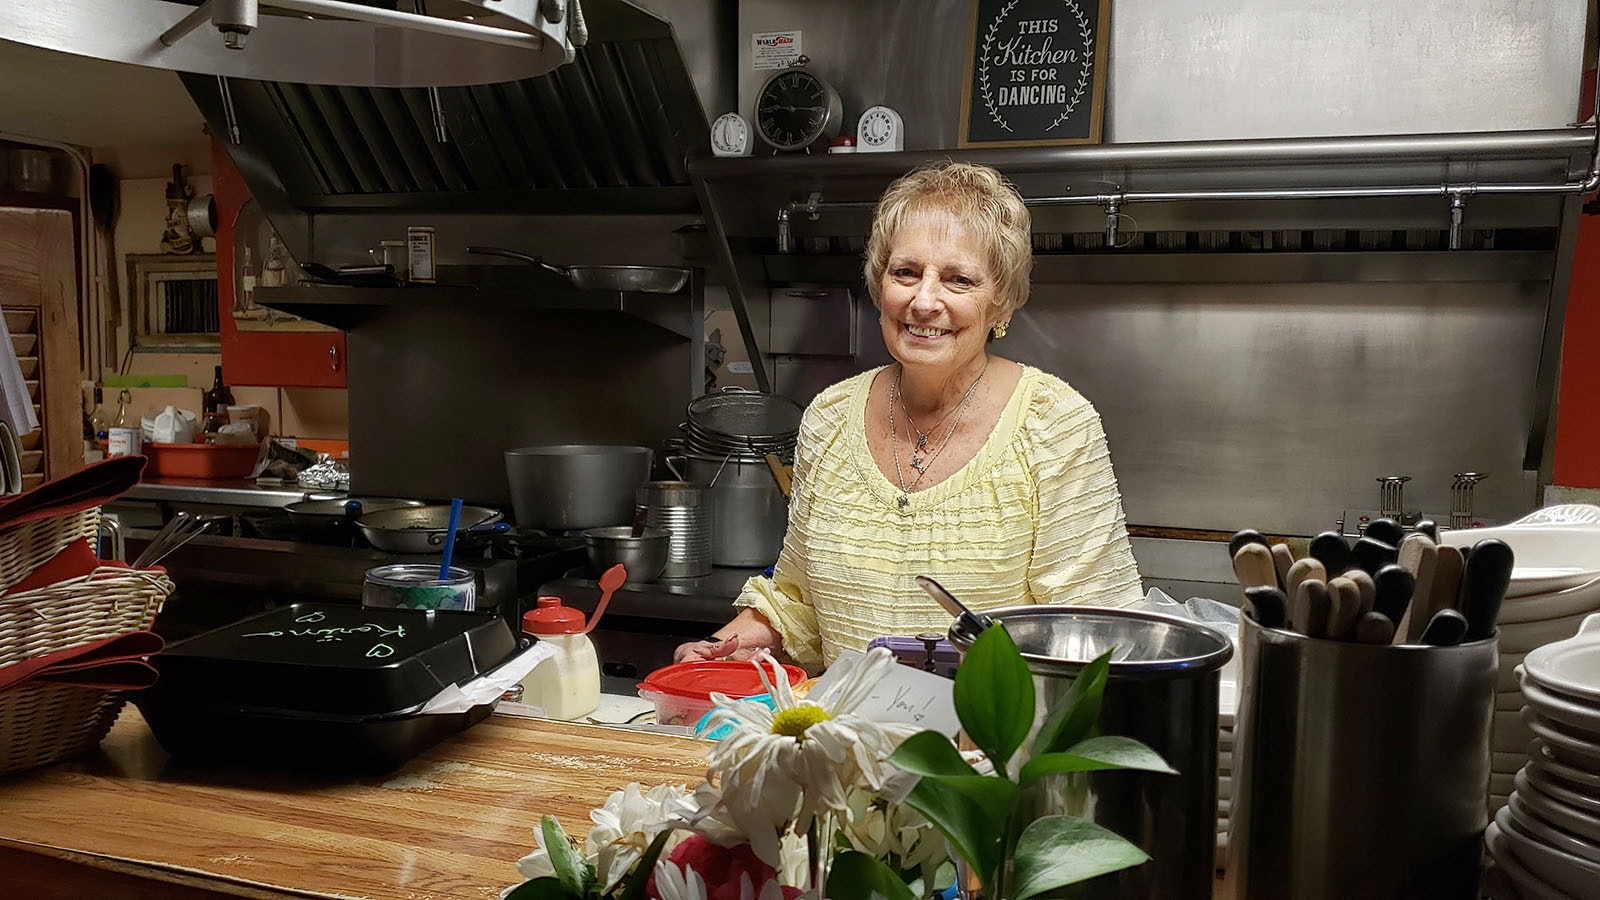 Suzi Bosco has been cooking at Bosco's in Casper for 61 years.